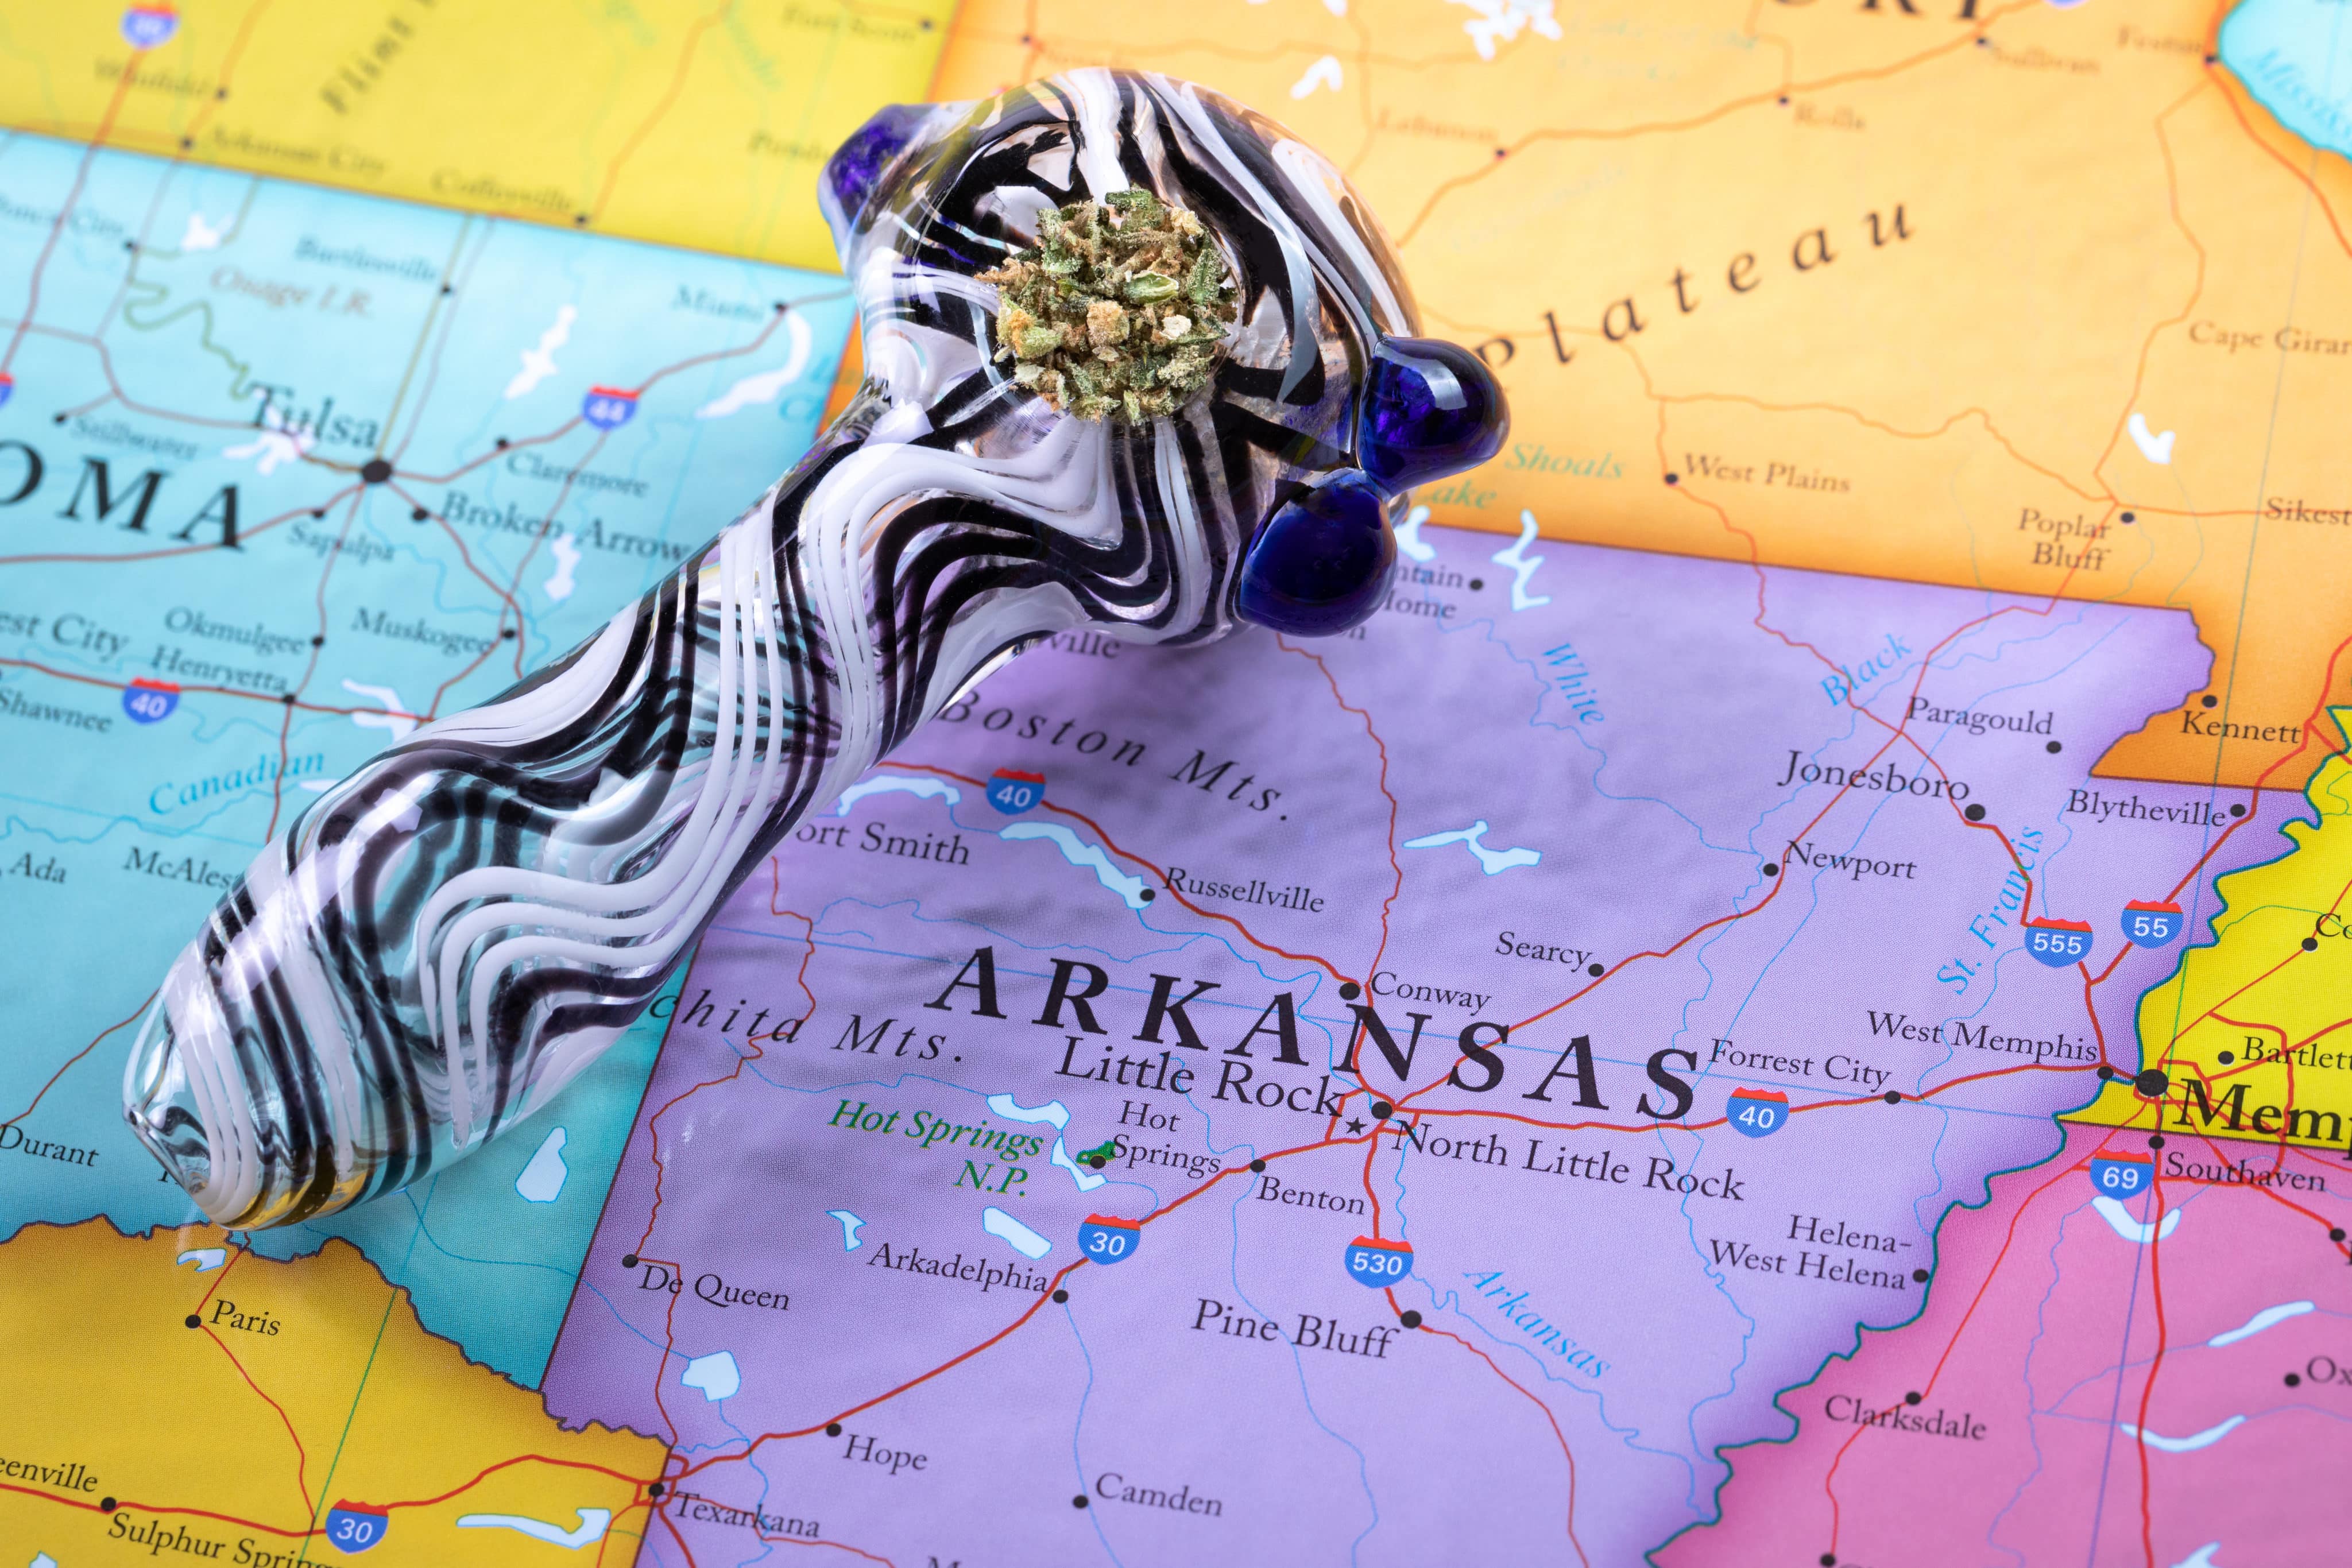 Recreational Pot Question Back on Arkansas Ballot—But Will Votes Count?